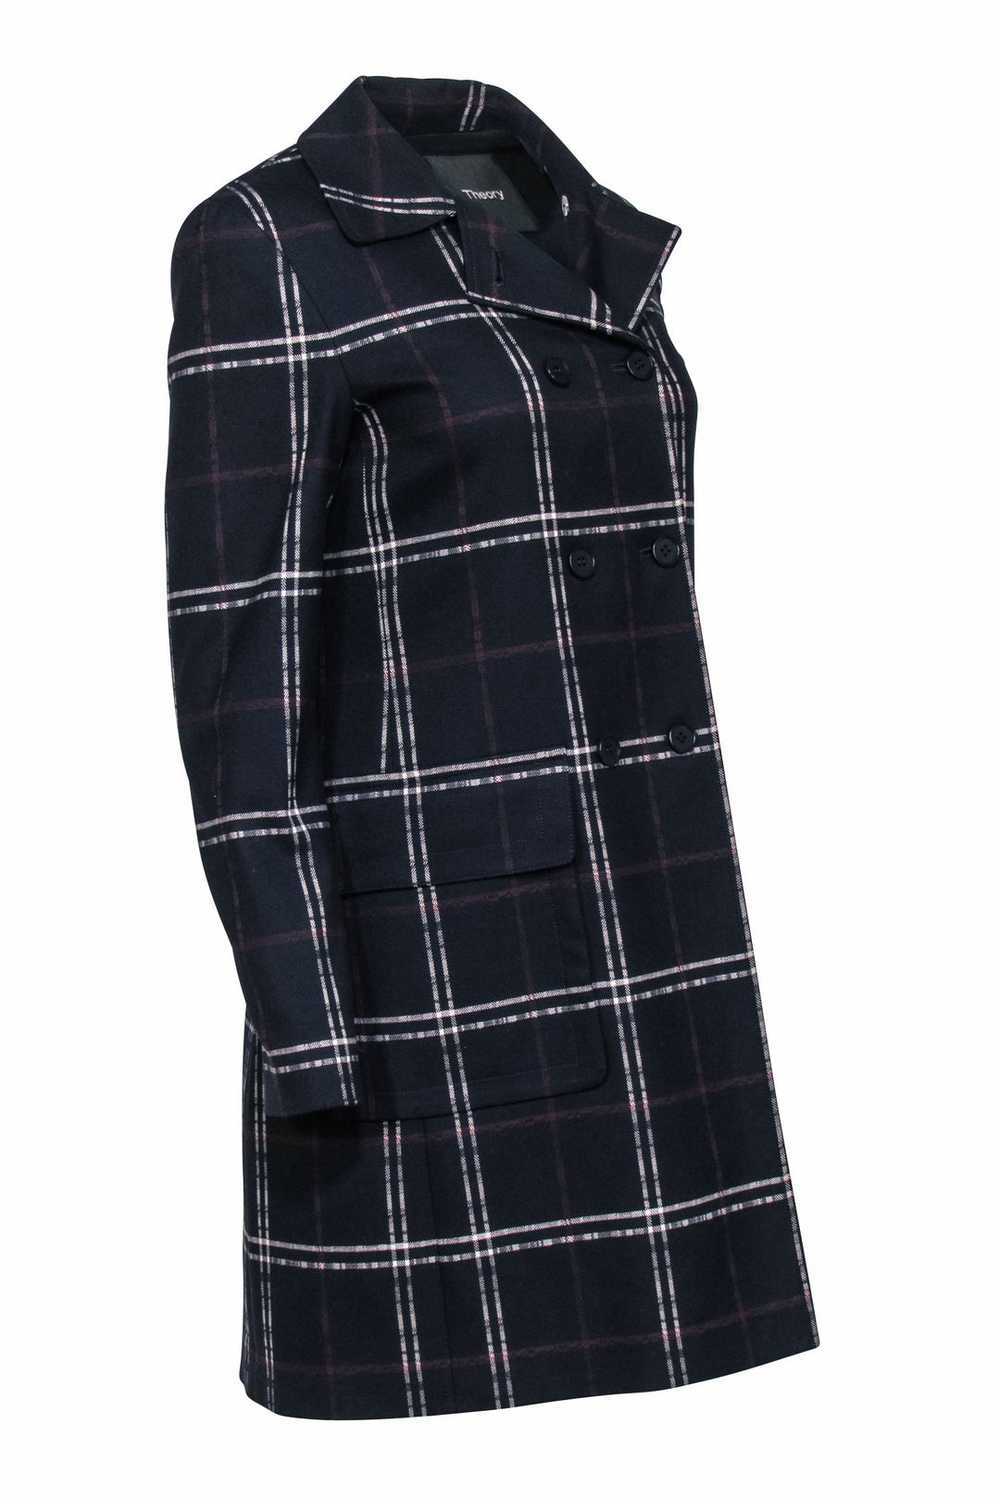 Theory - Navy, Red & White Plaid Double Breasted … - image 2